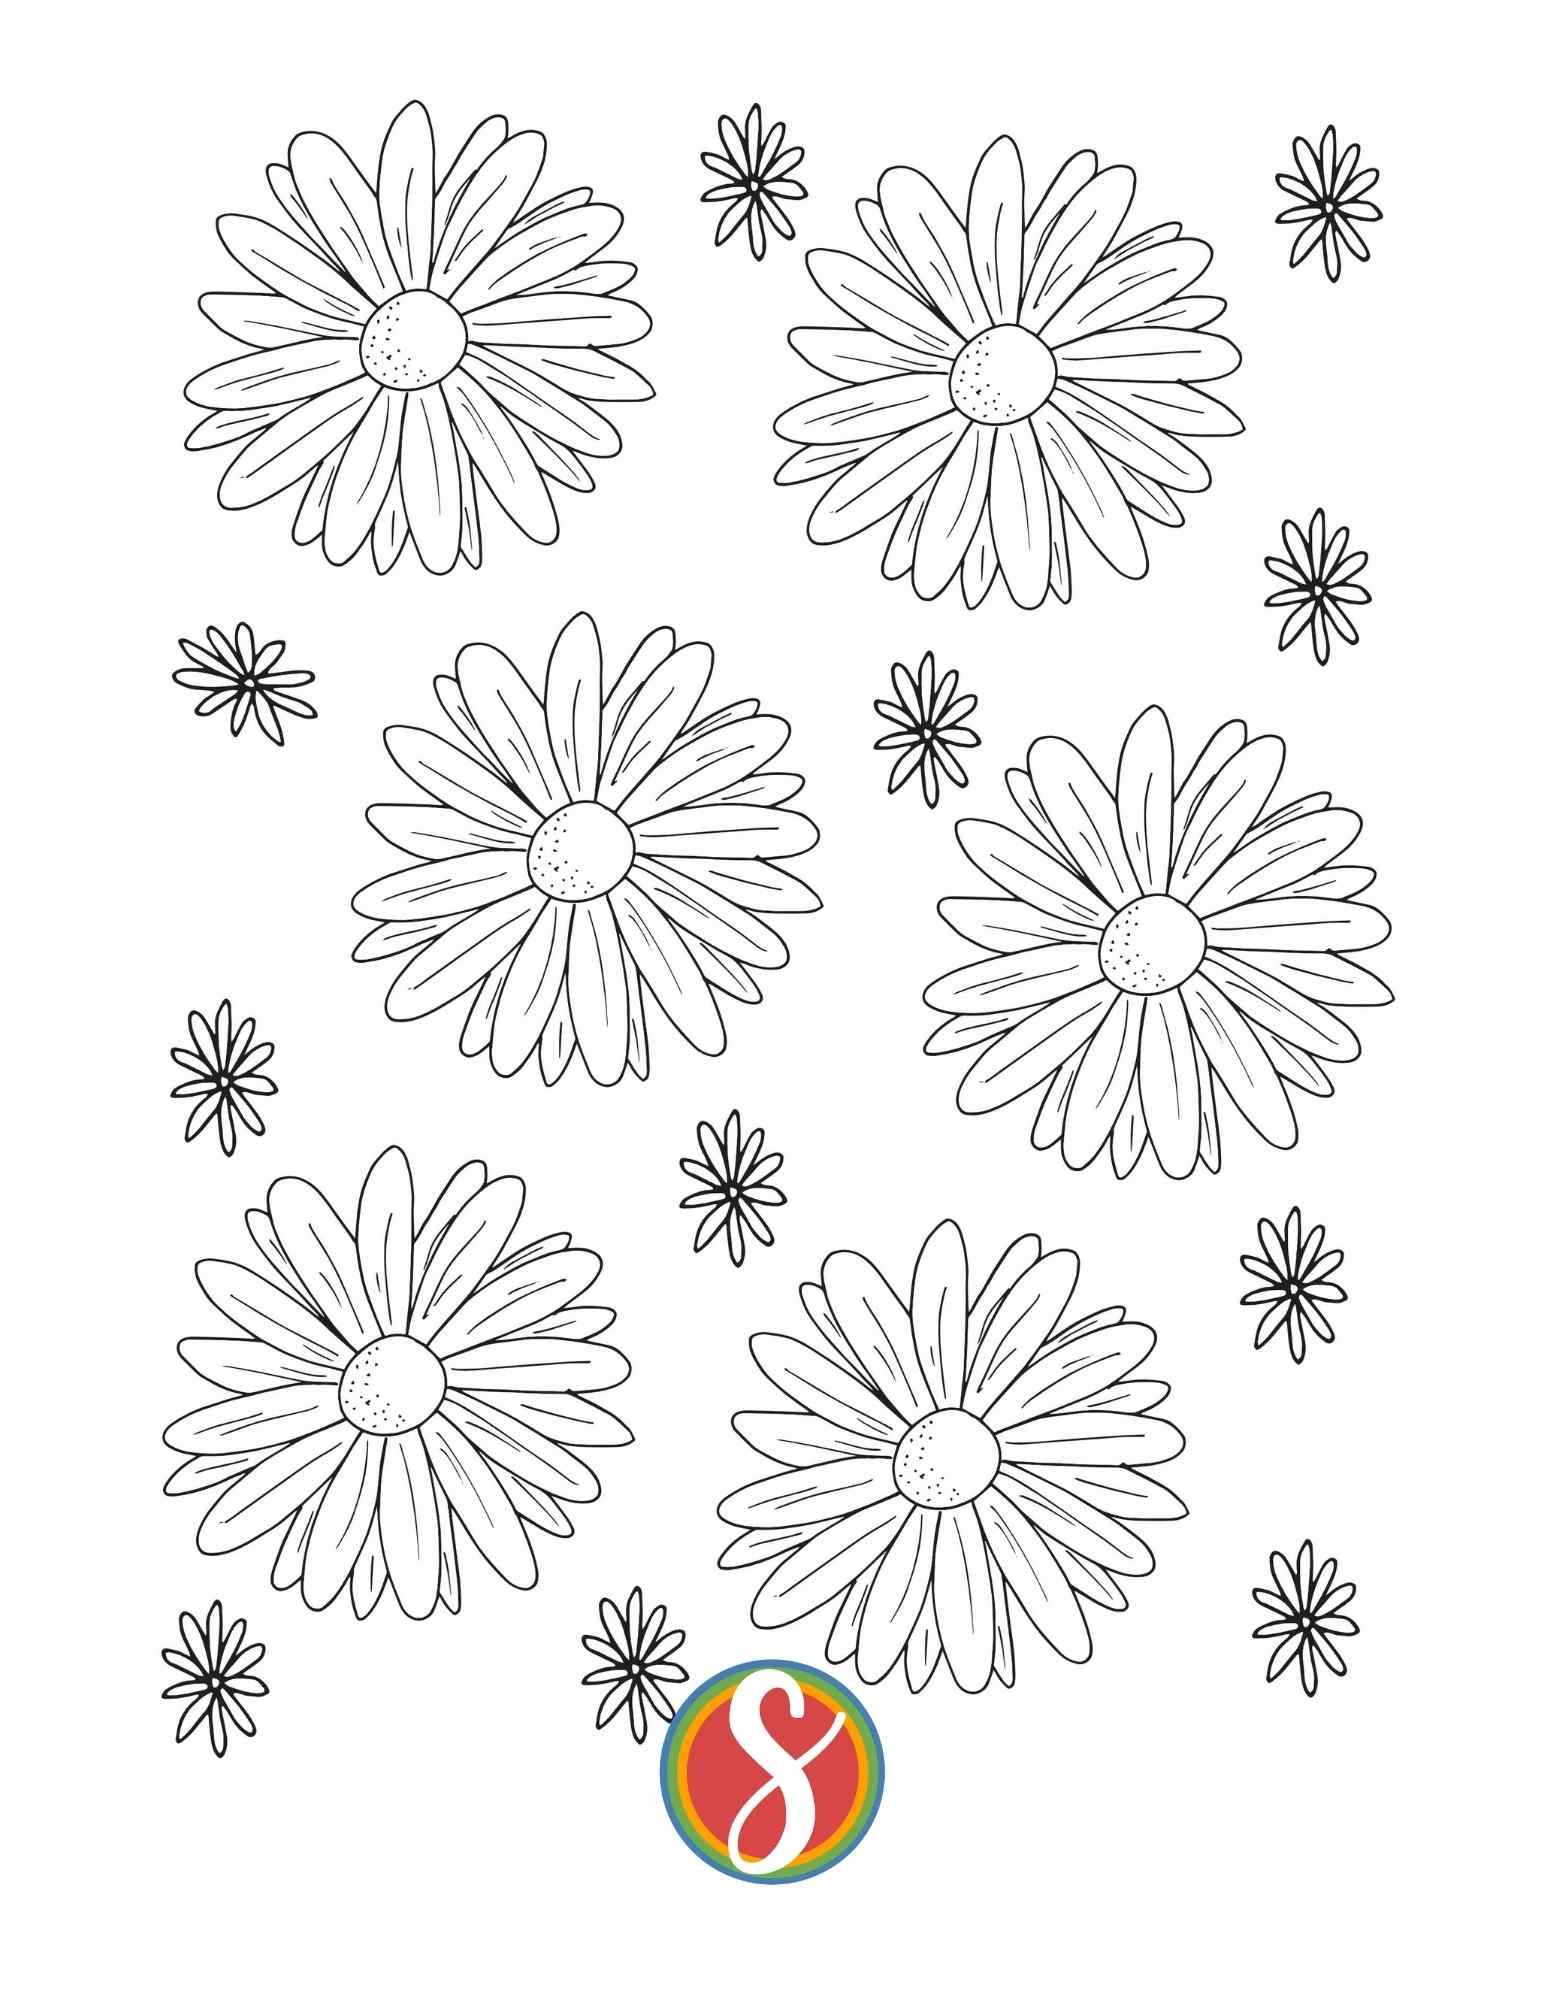 Free daisy coloring pages â stevie doodles